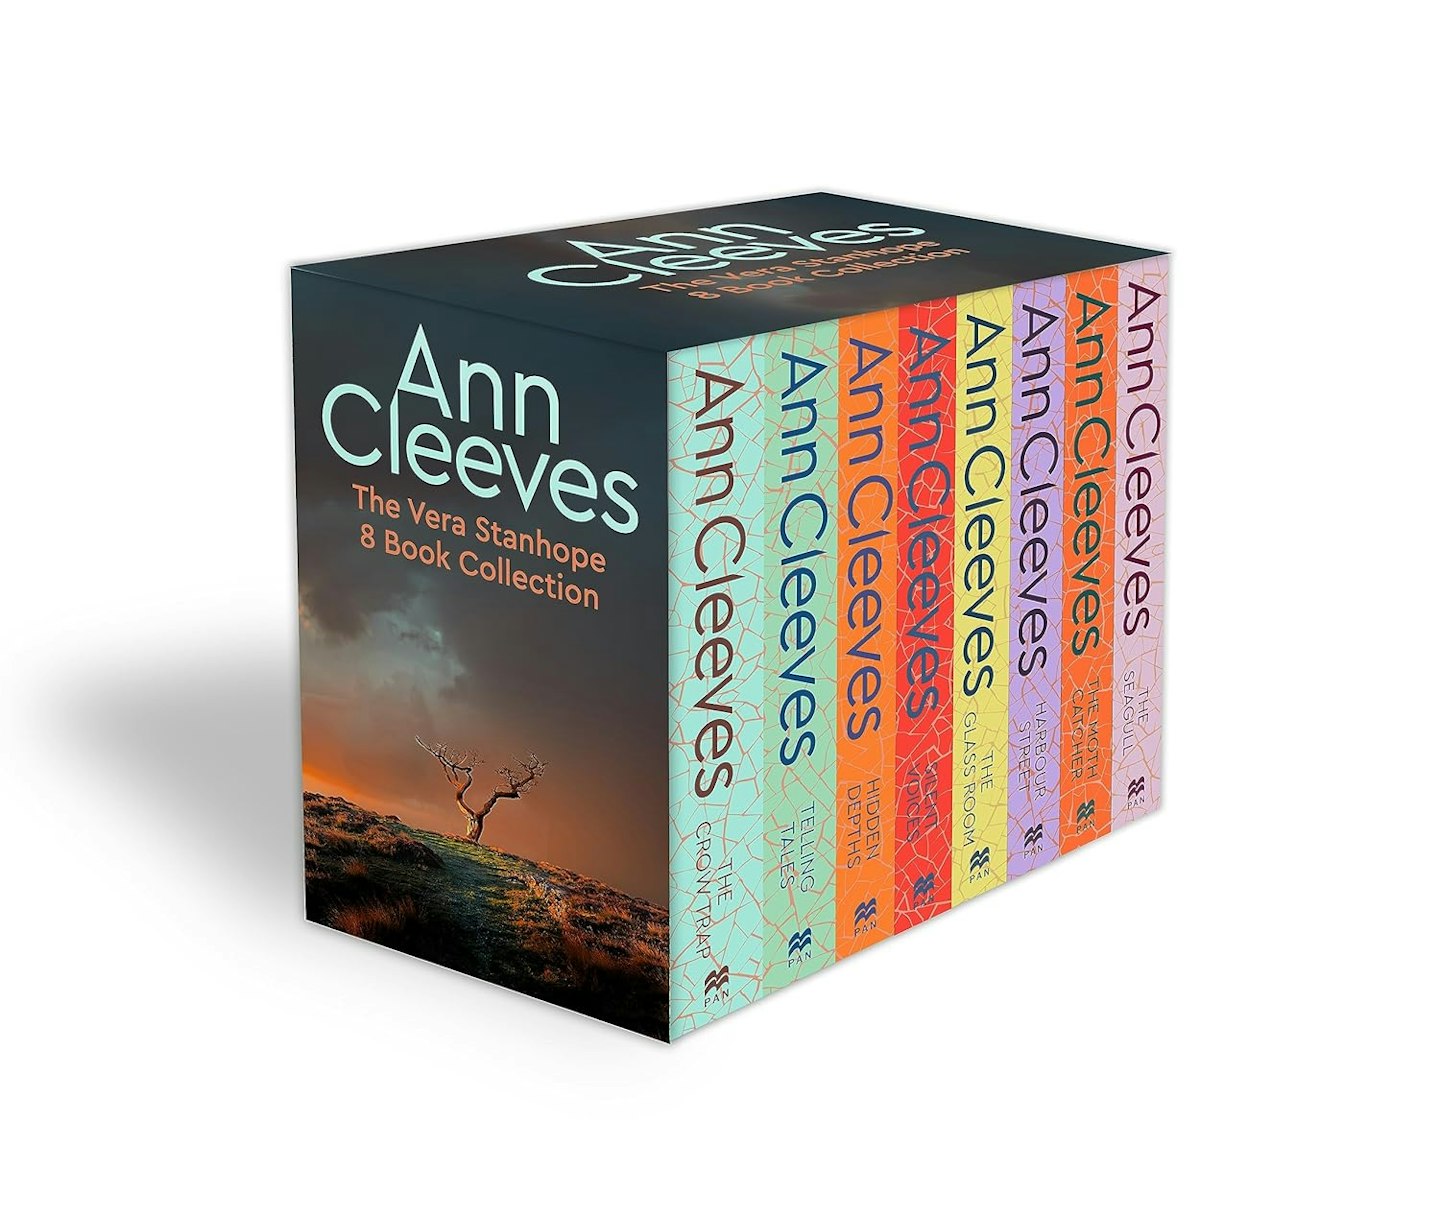 Ann Cleeves book collection Vera Stanhope